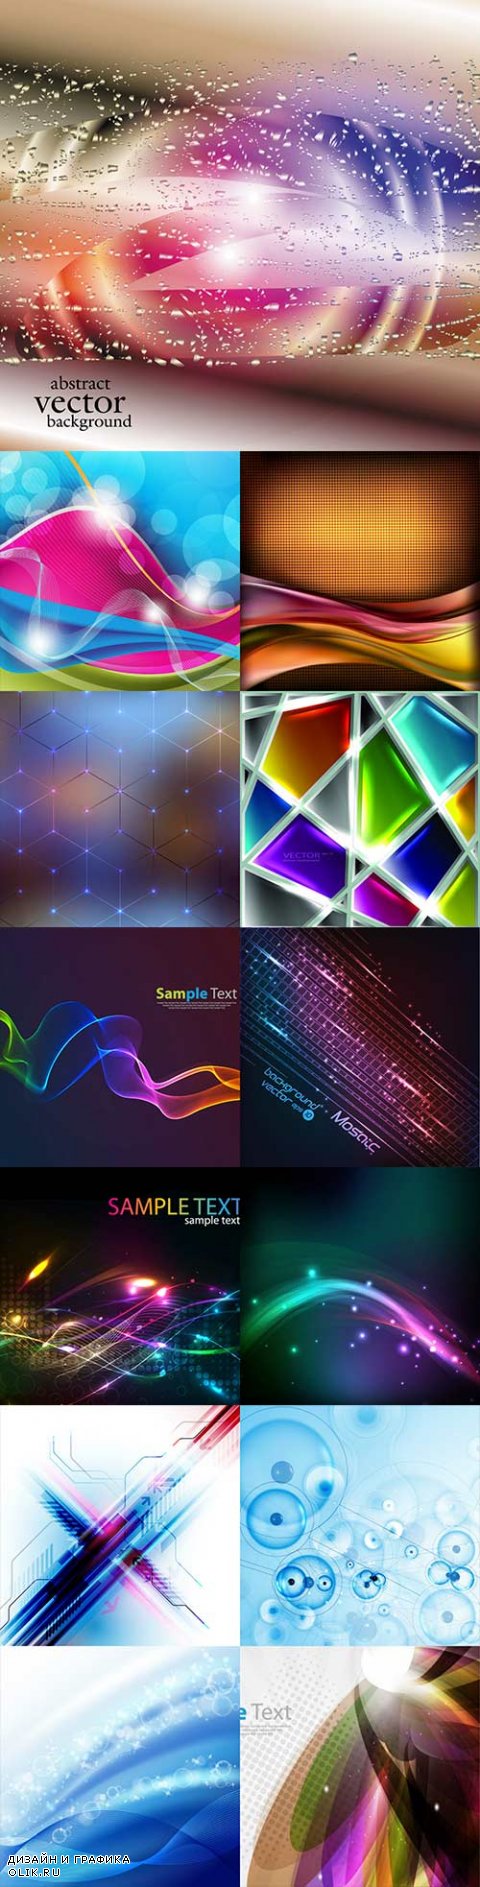 Bright colorful abstract backgrounds vector -53